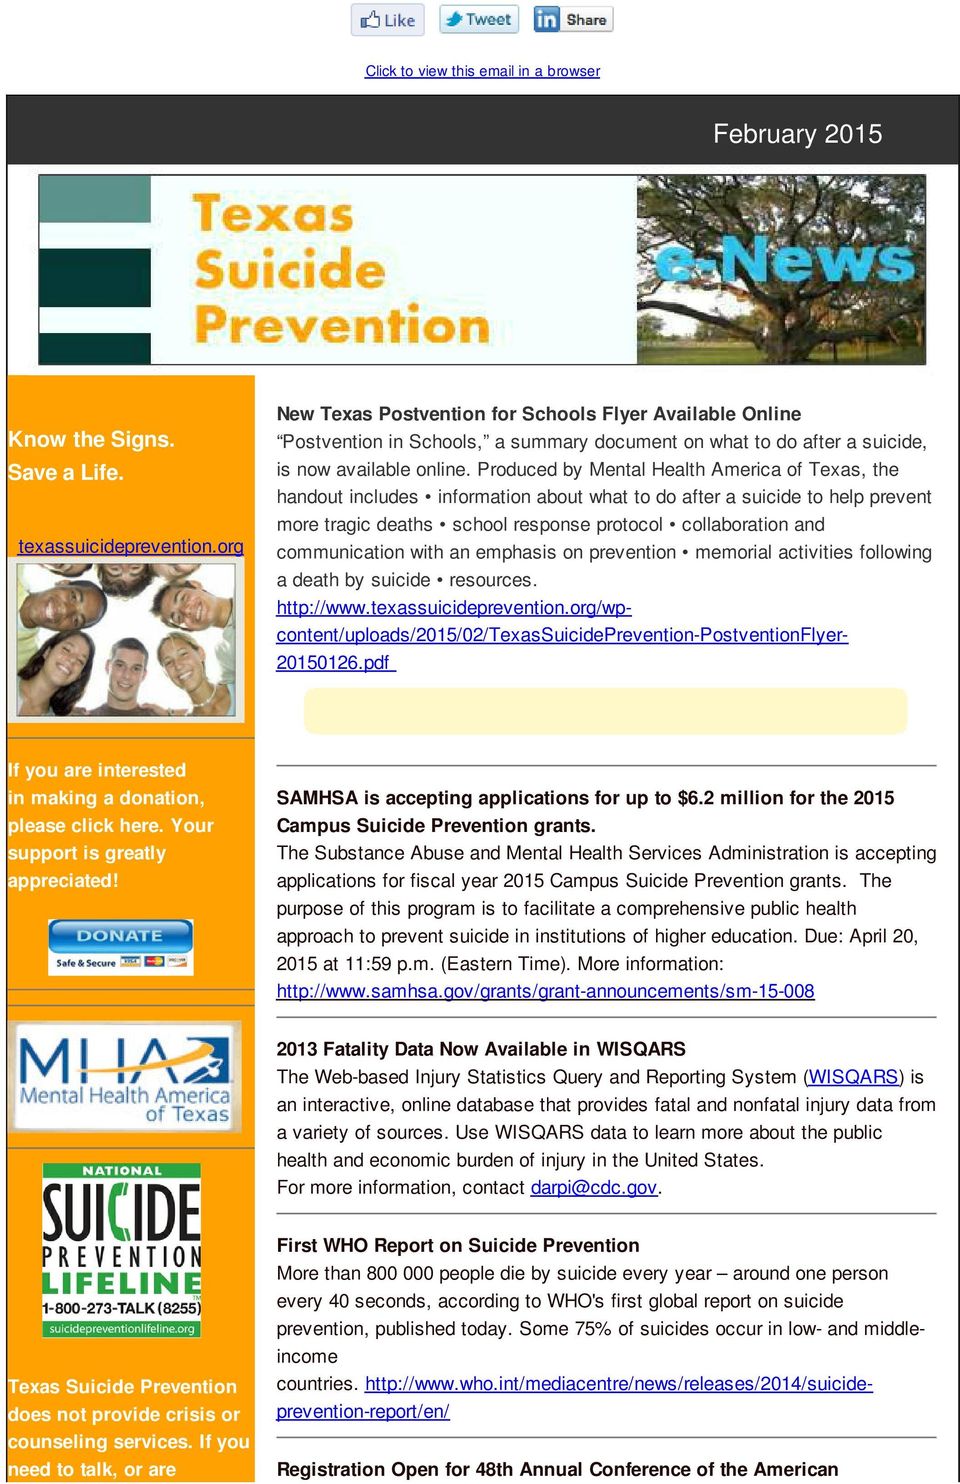 Produced by Mental Health America of Texas, the handout includes information about what to do after a suicide to help prevent more tragic deaths school response protocol collaboration and